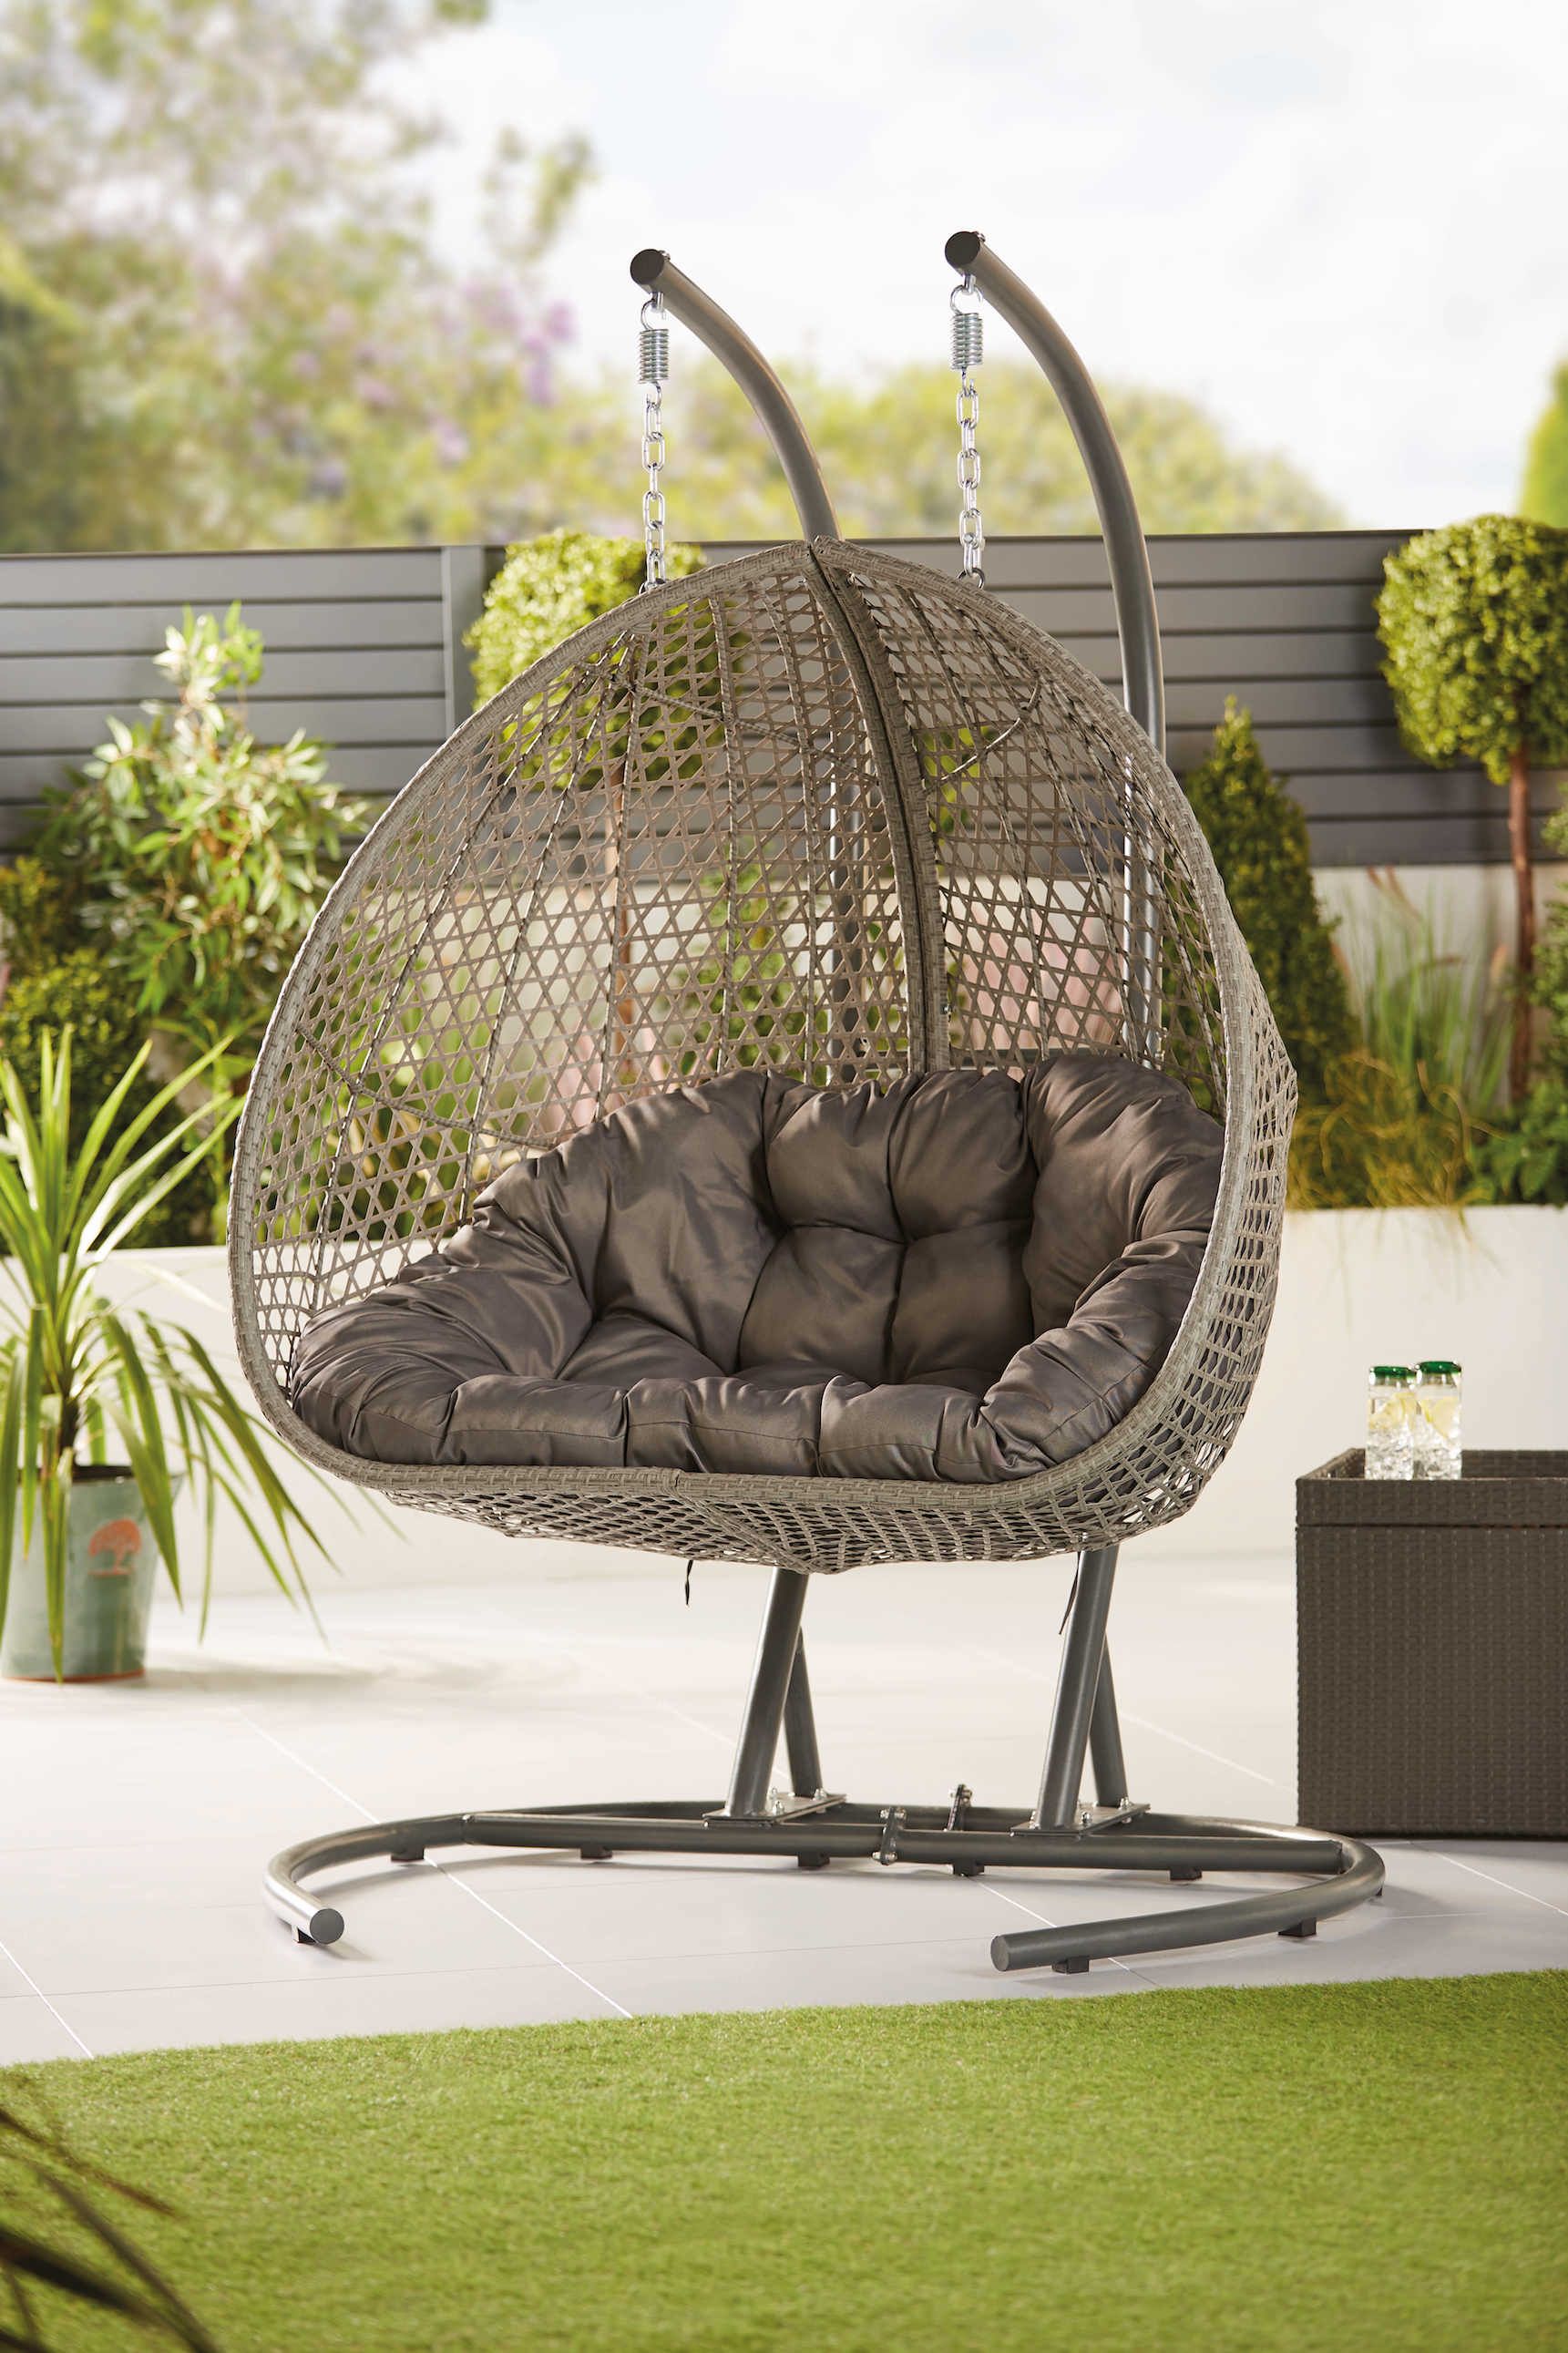 Aldi Egg Chair Large Hanging, Are Egg Chairs Waterproof